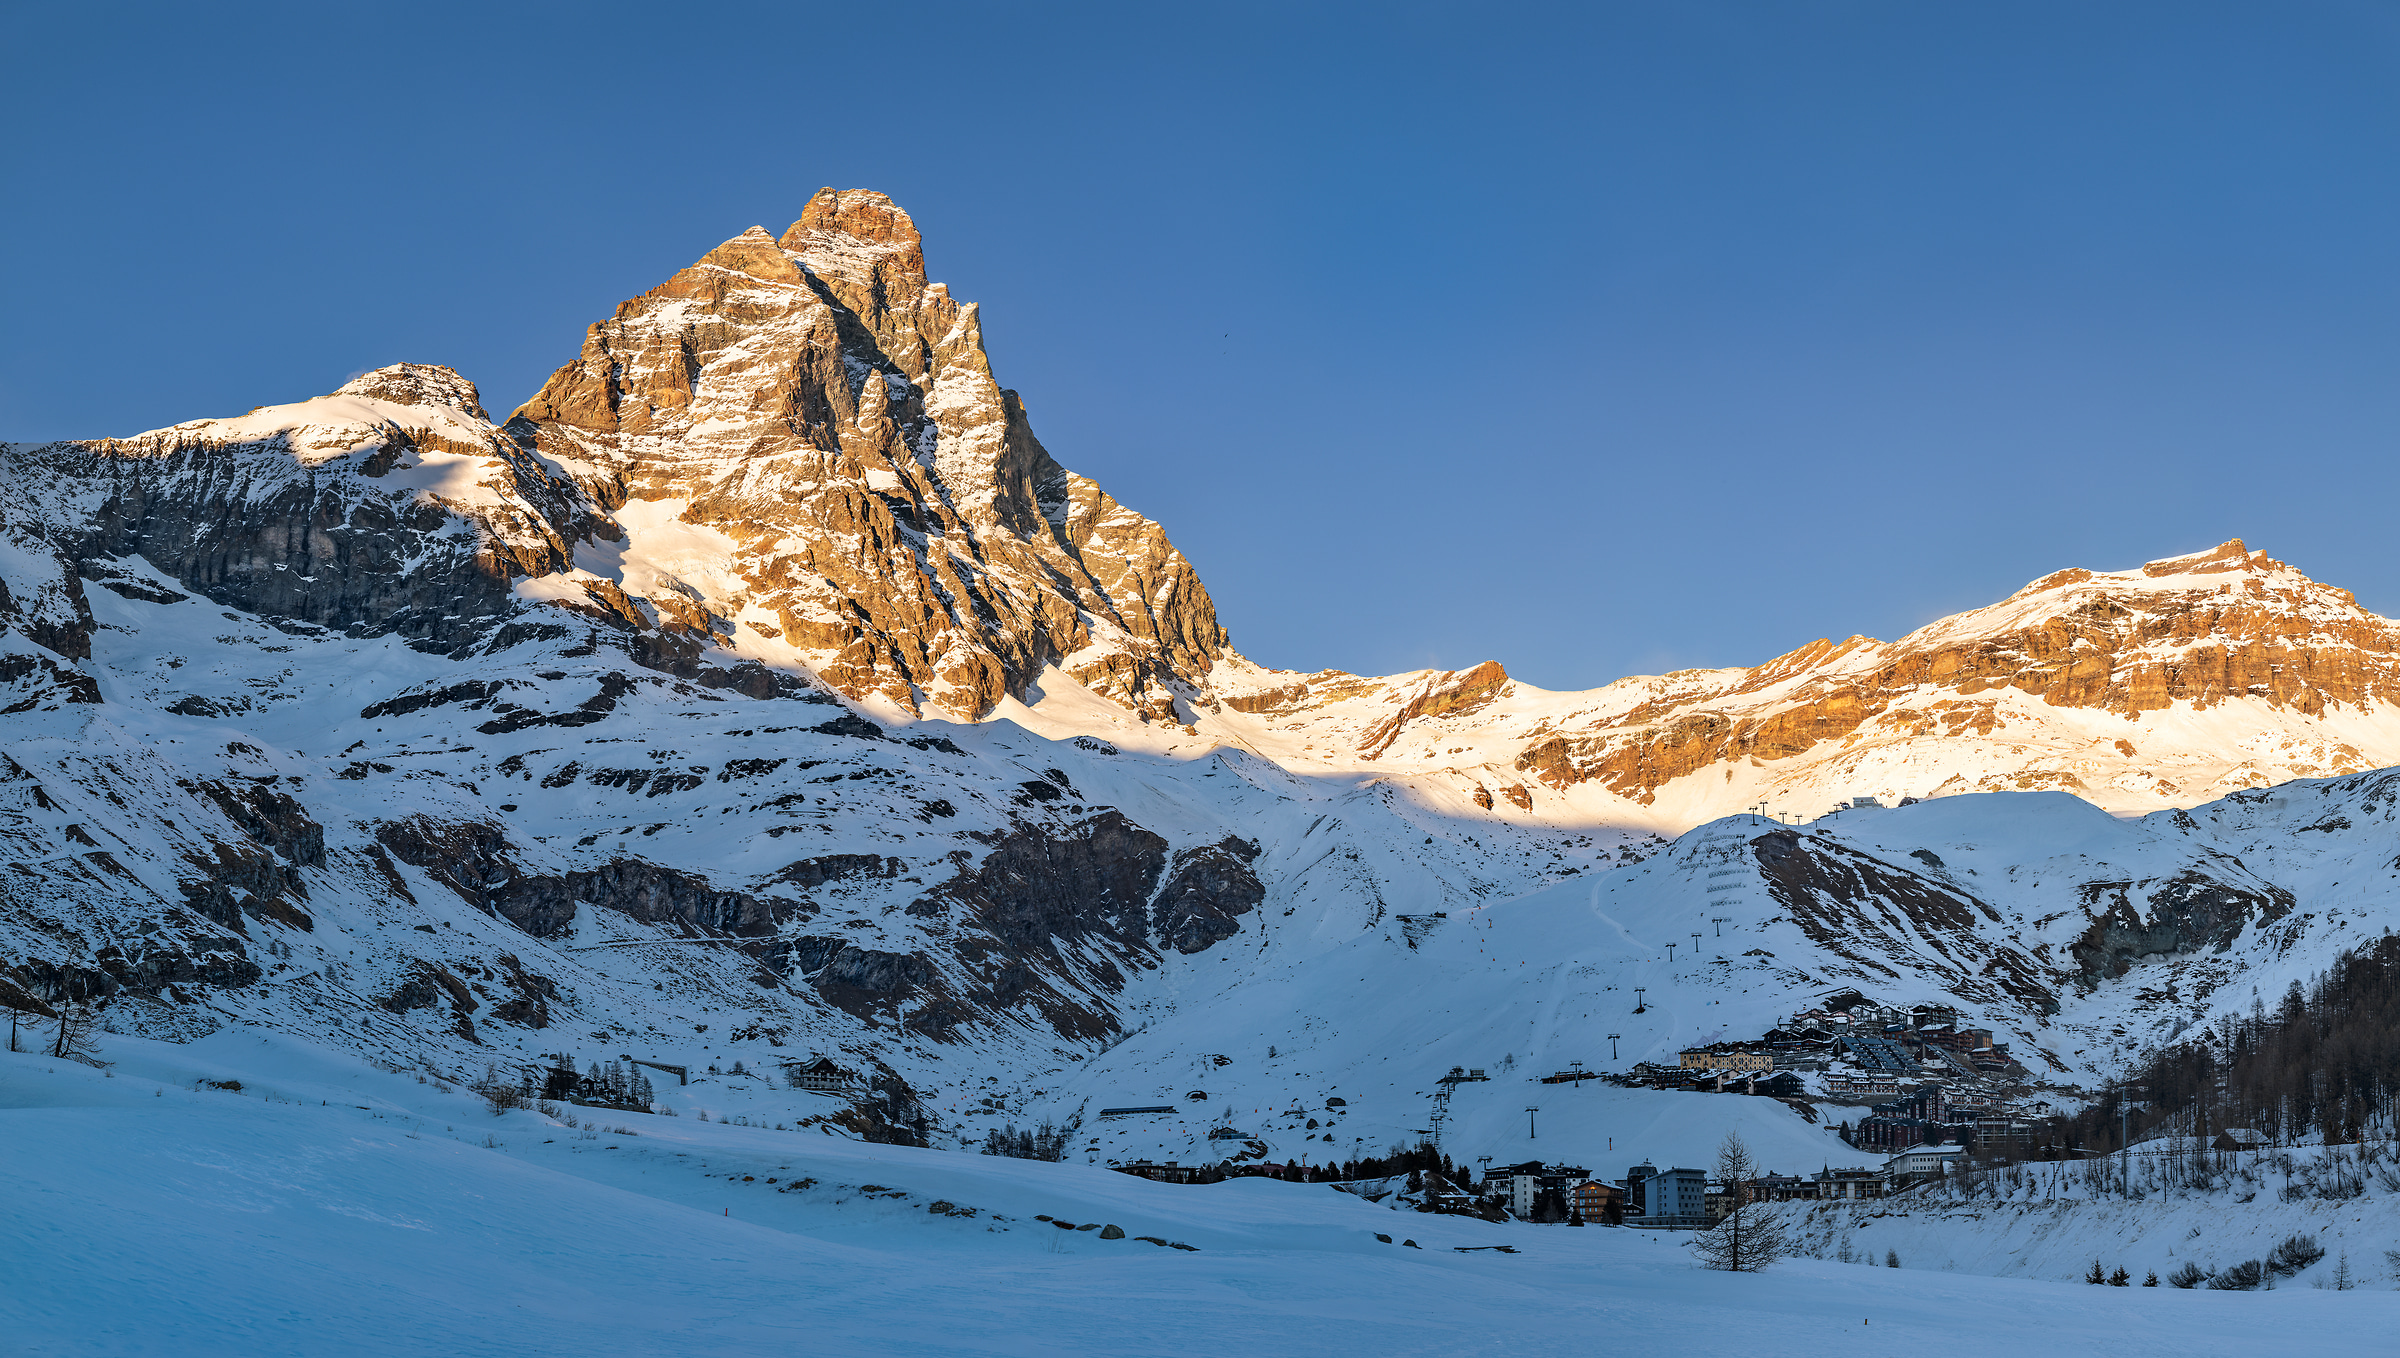 439 megapixels! A very high resolution, large-format wall mural photo of the Matterhorn; landscape photograph created by Duilio Fiorille in Breuil Cervinia, Valtournenche, Valle d'Aosta, Italy.